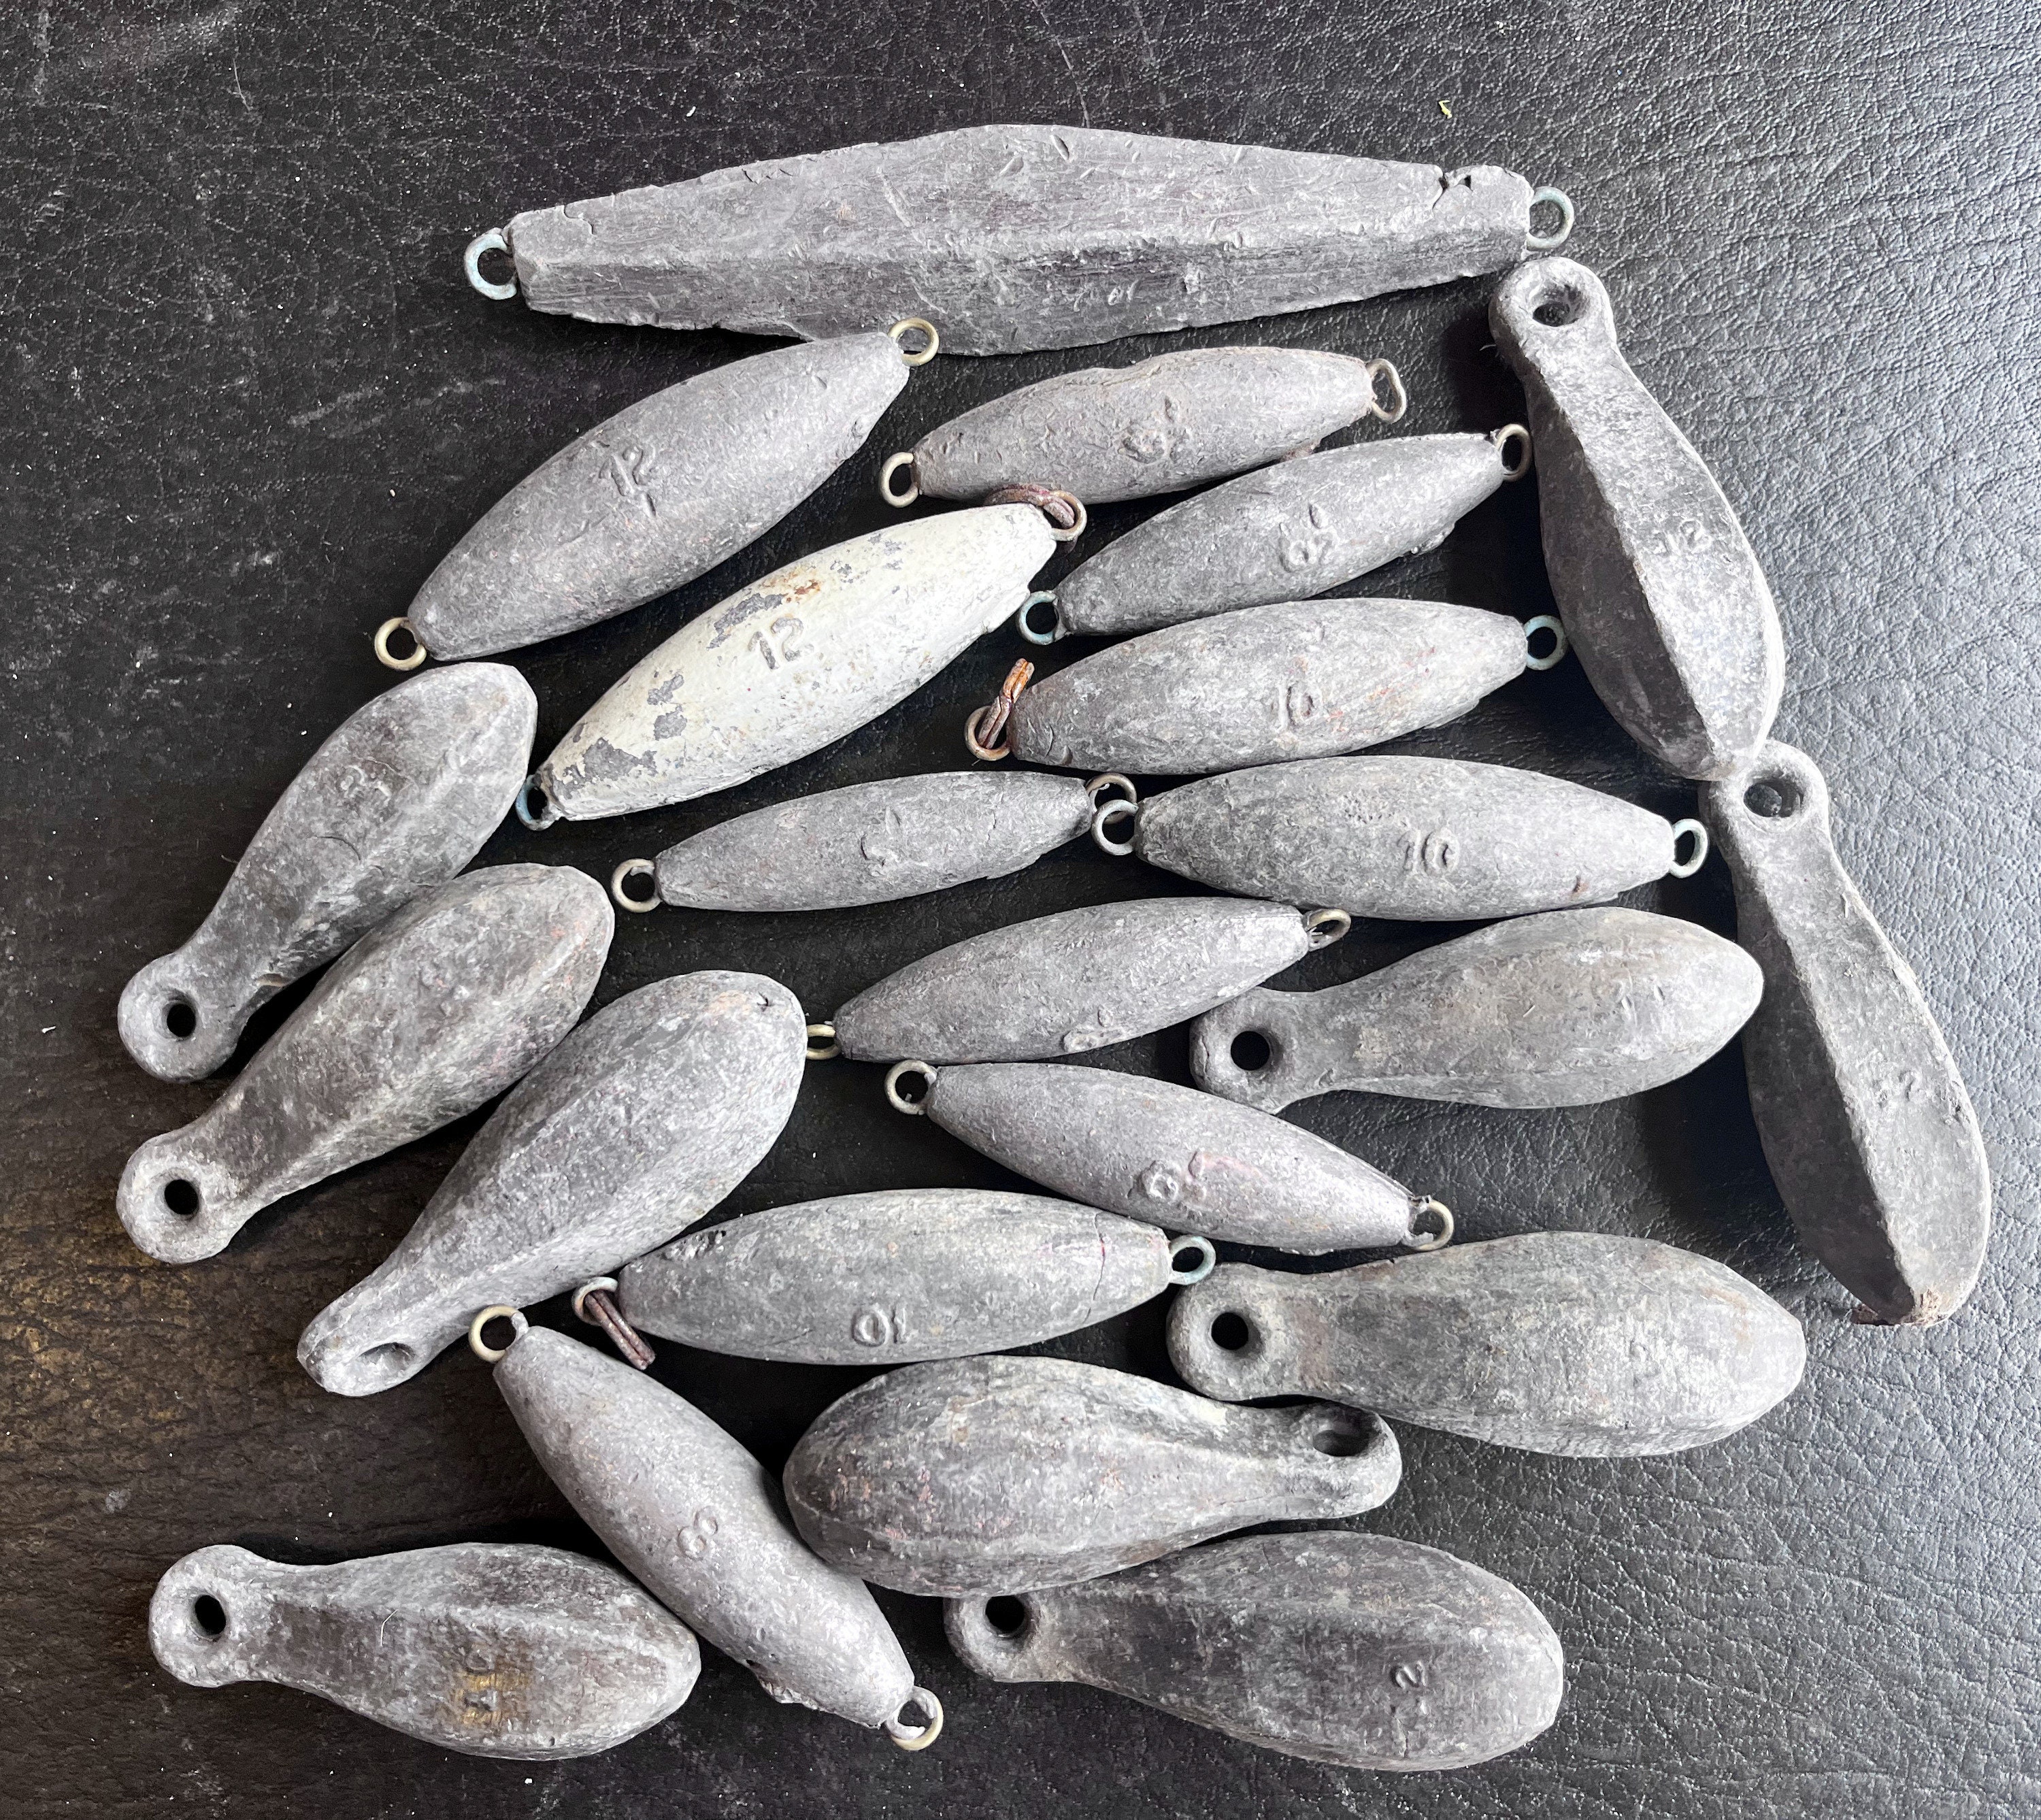 One Pound Lead Ingots, Great for Fishing Weights, Sinkers, Fishing jigs and  Lead Bullets Casting